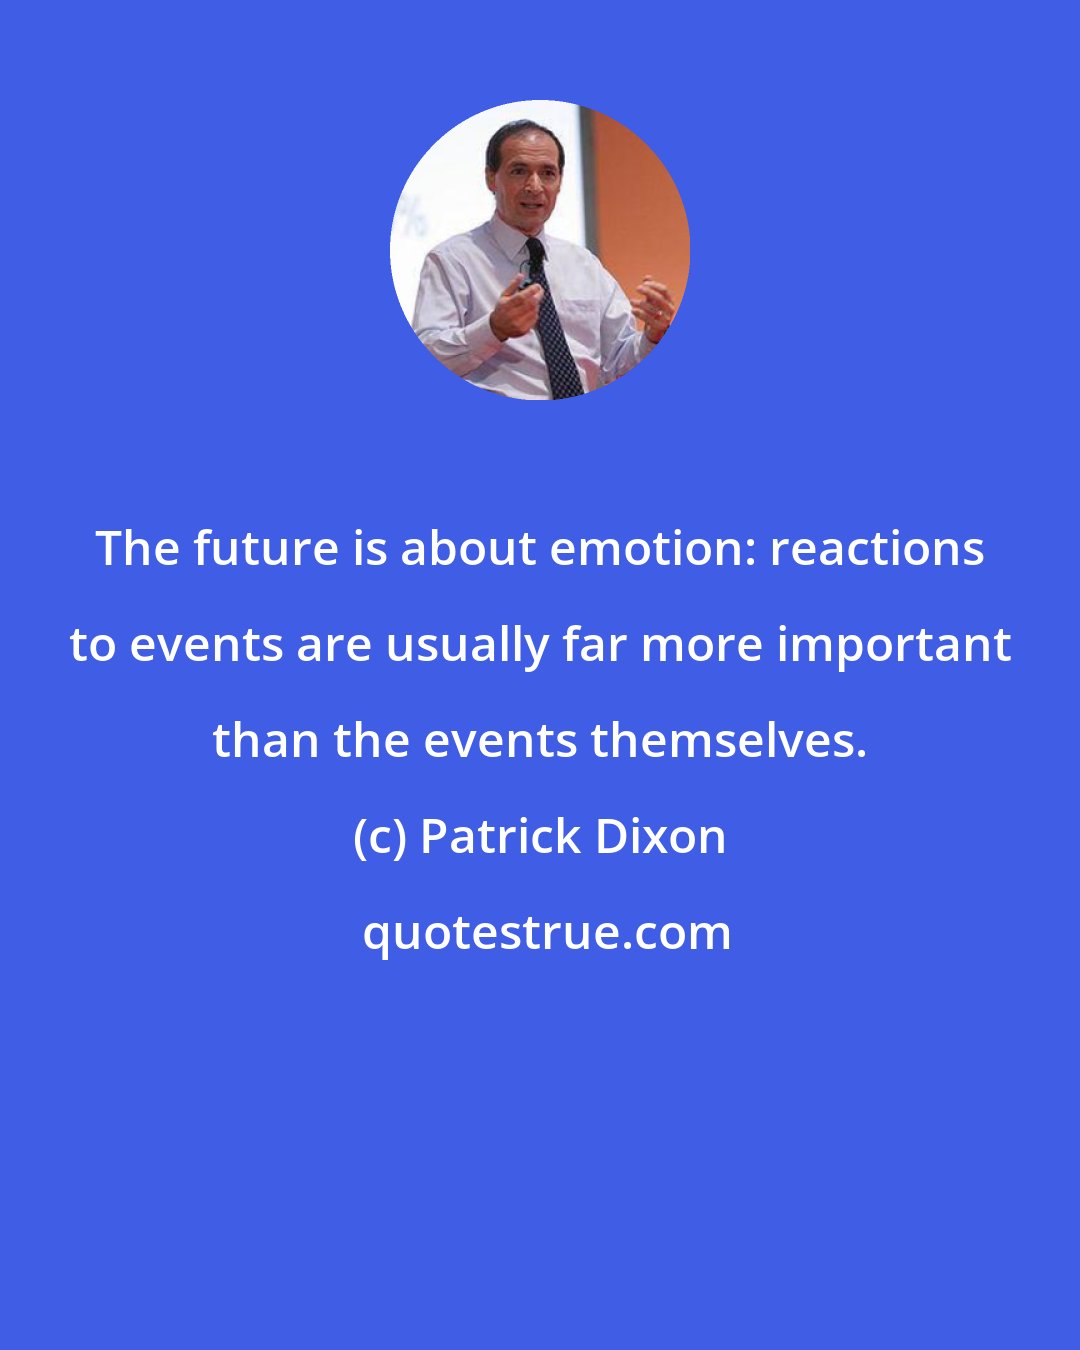 Patrick Dixon: The future is about emotion: reactions to events are usually far more important than the events themselves.